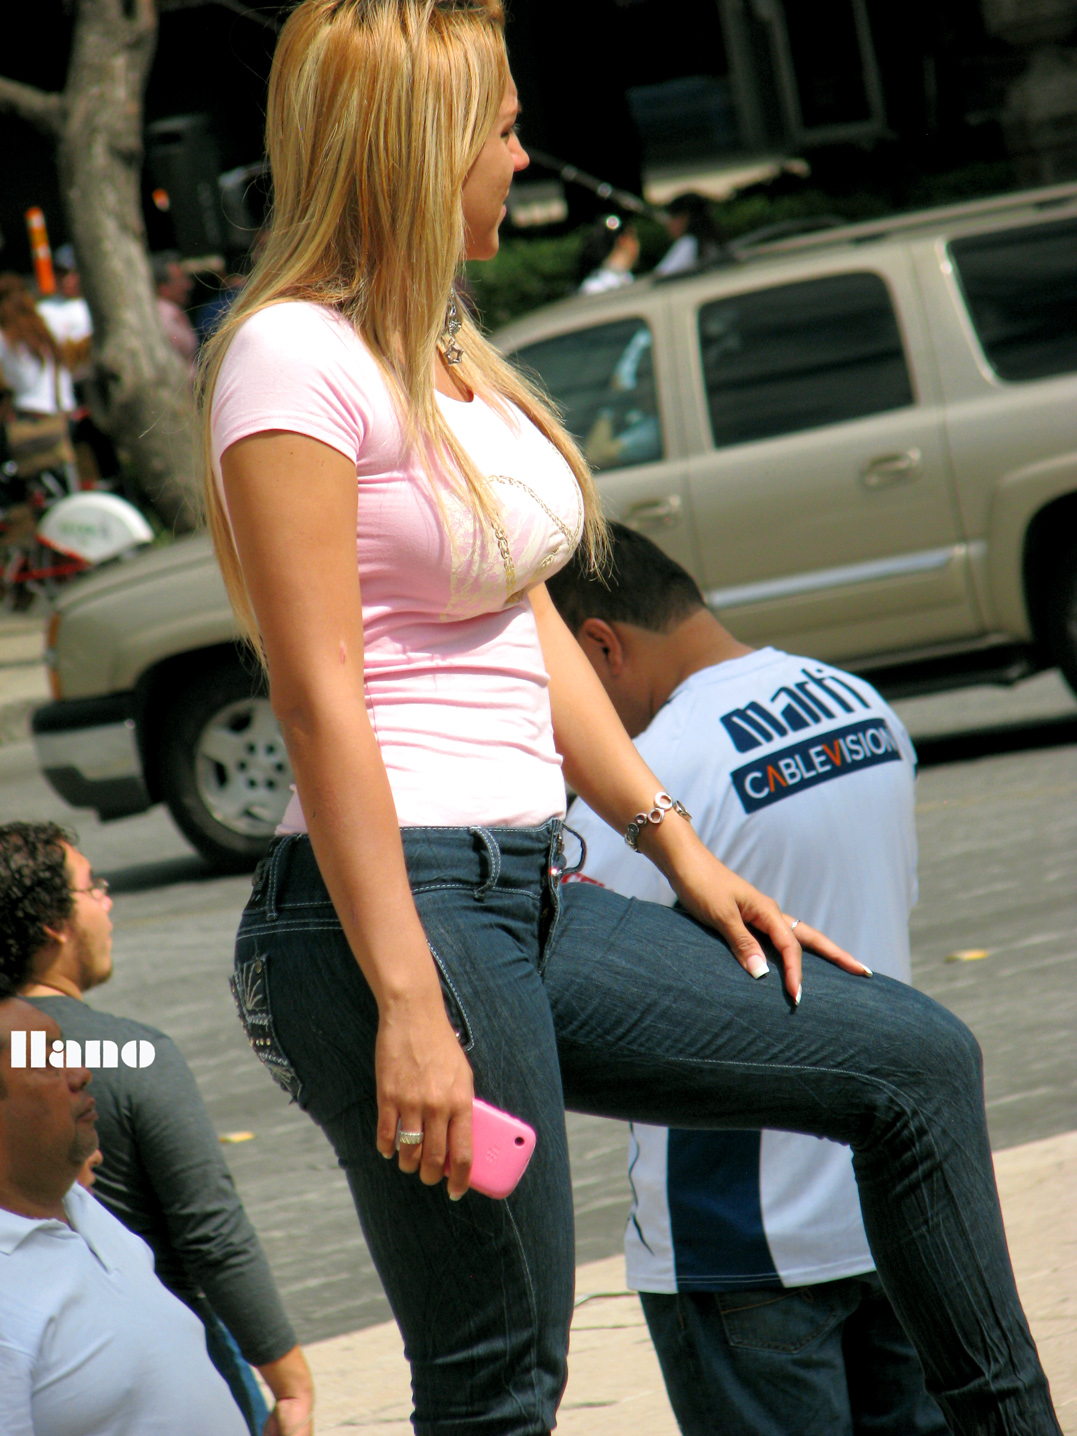 Perfect Bubble Butts Candid Jeans